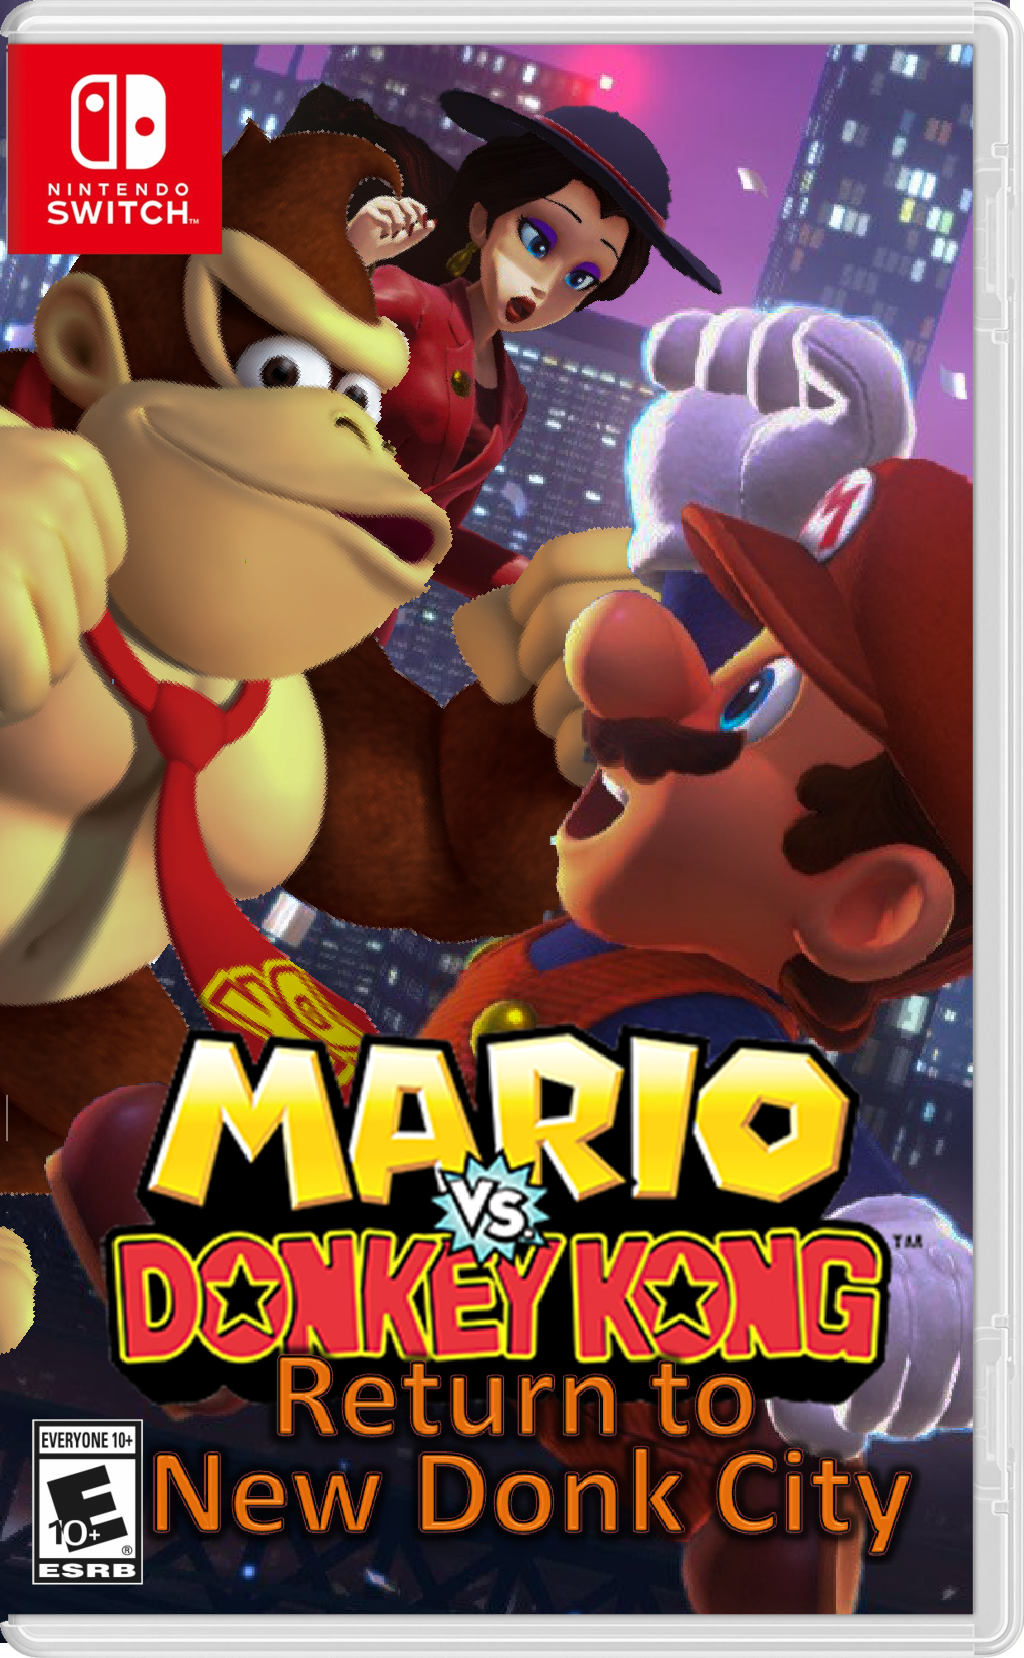 Mario vs. Donkey Kong: How to get the new Nintendo Switch game